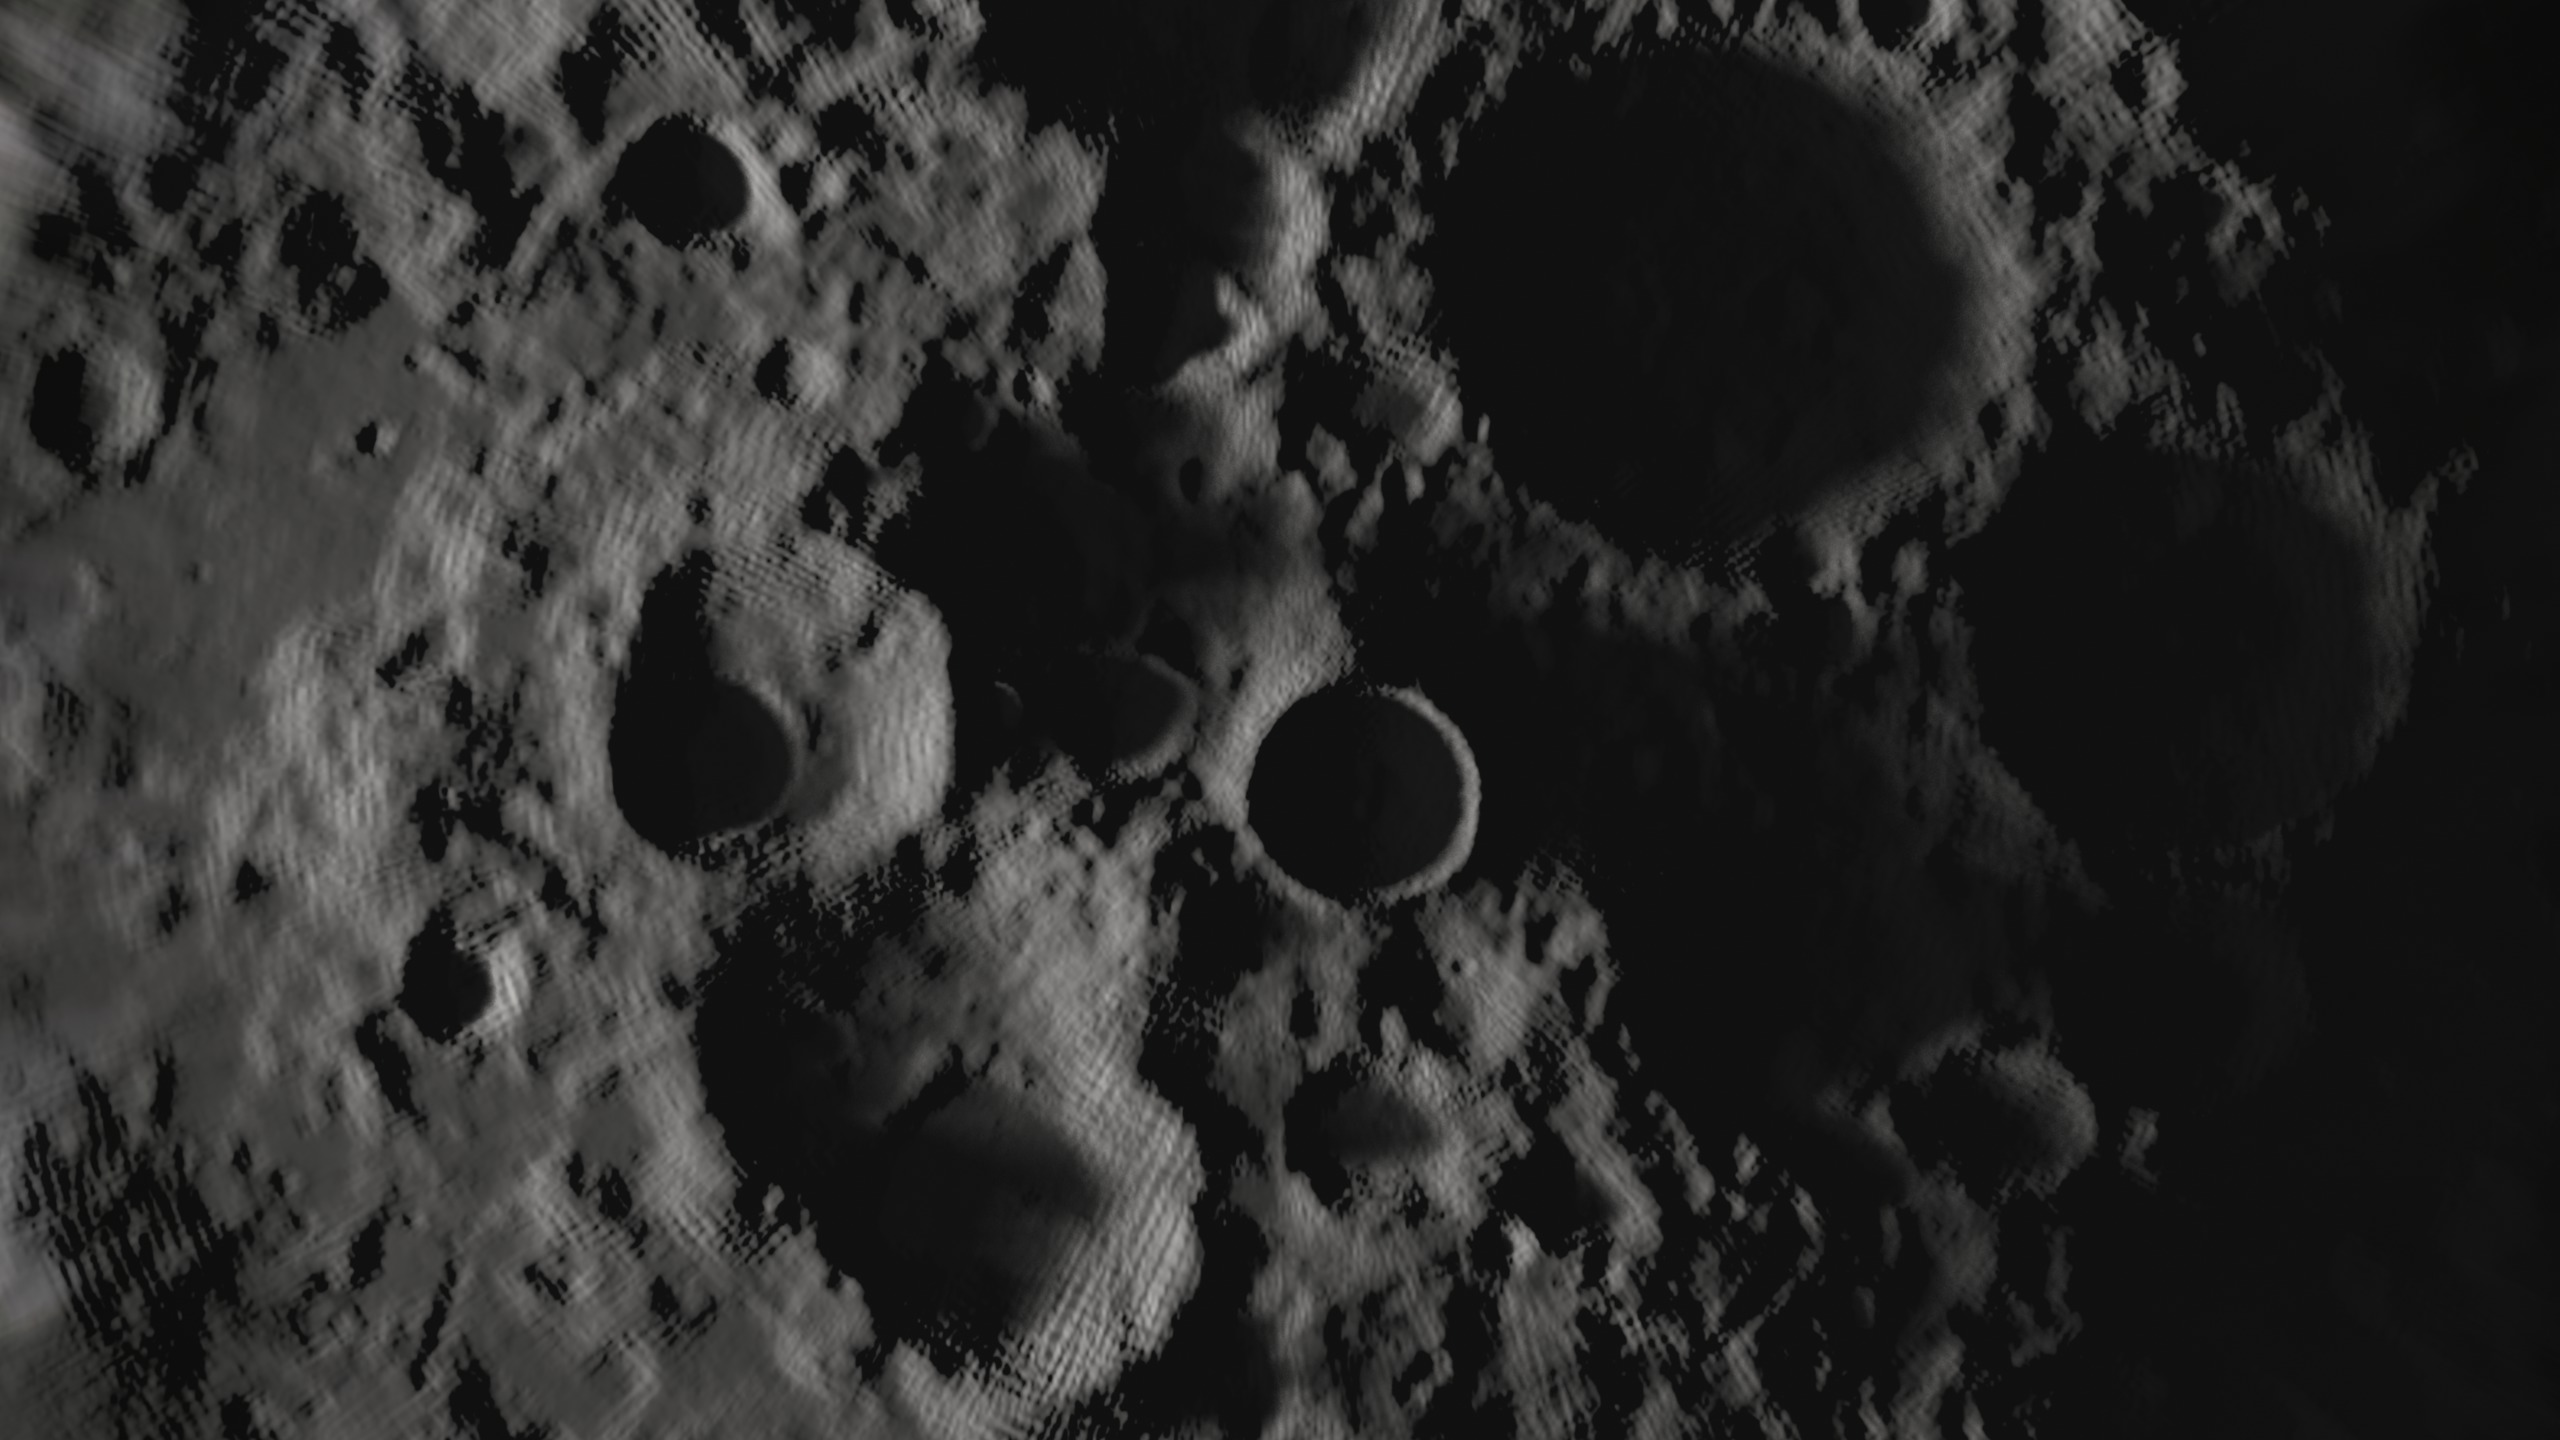 Photo of Moon's surface showing dark shadow in cratered regions